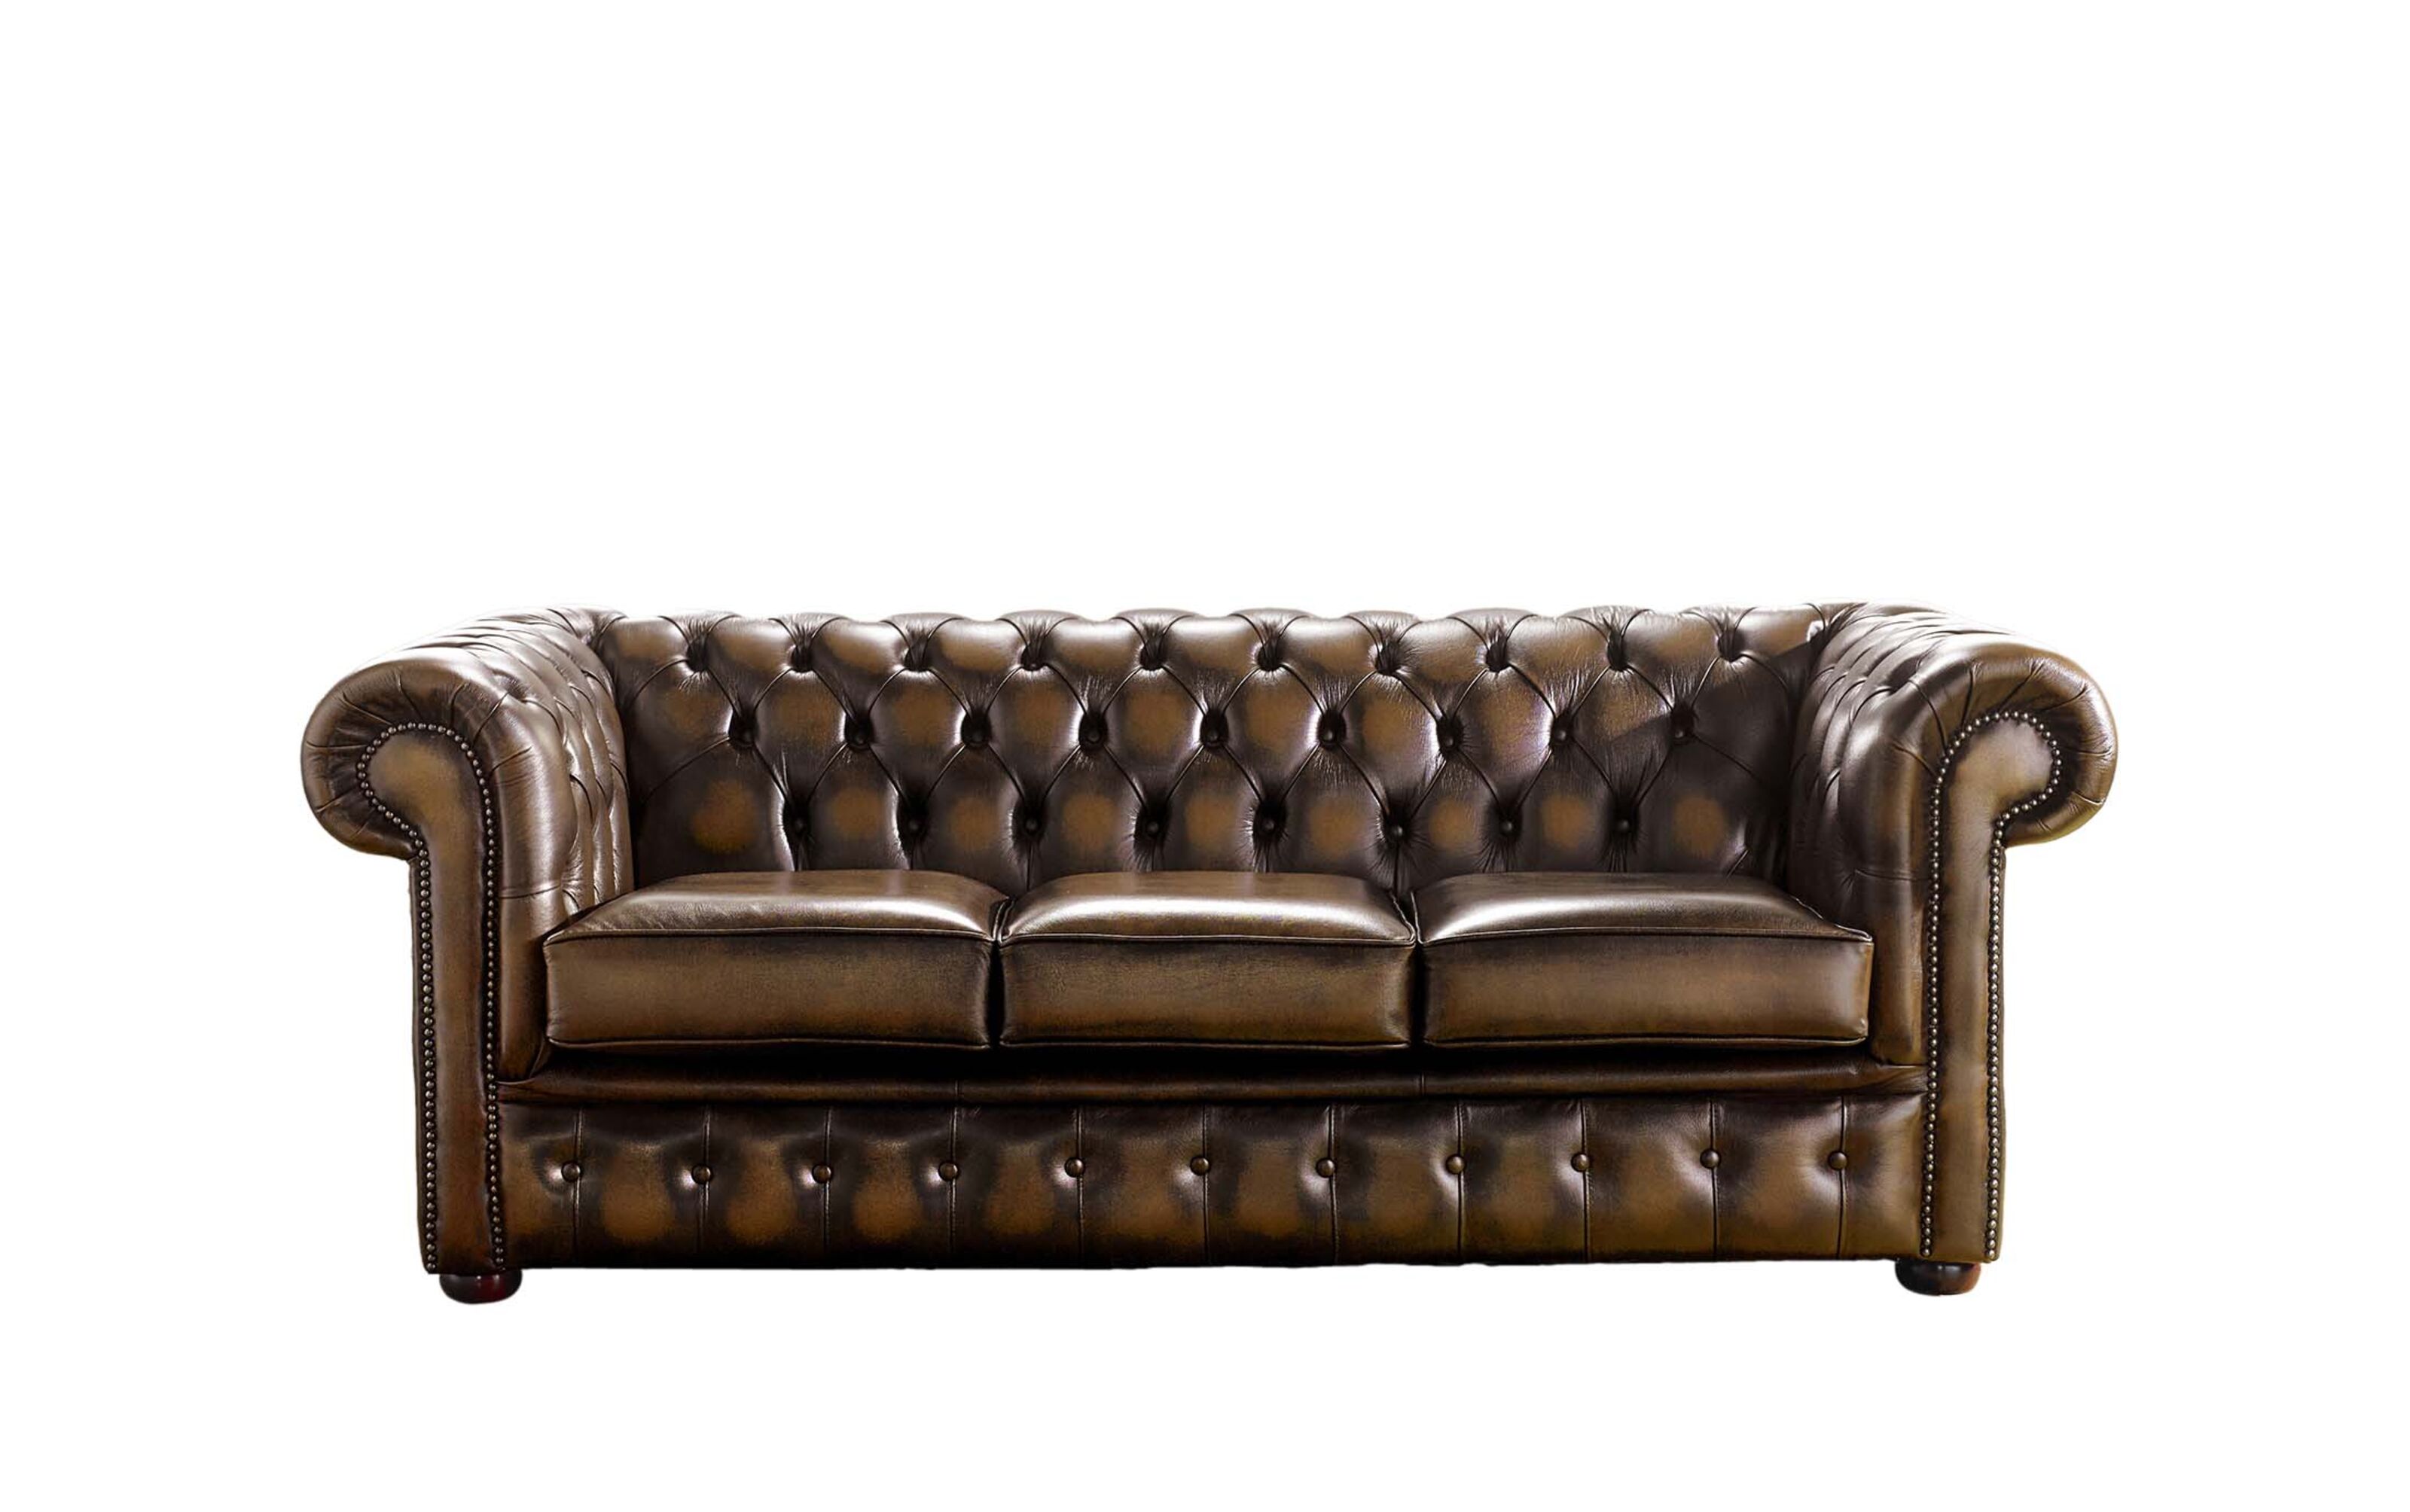 Style Spectrum A Guide to the Different Varieties of Chesterfield Sofas  %Post Title